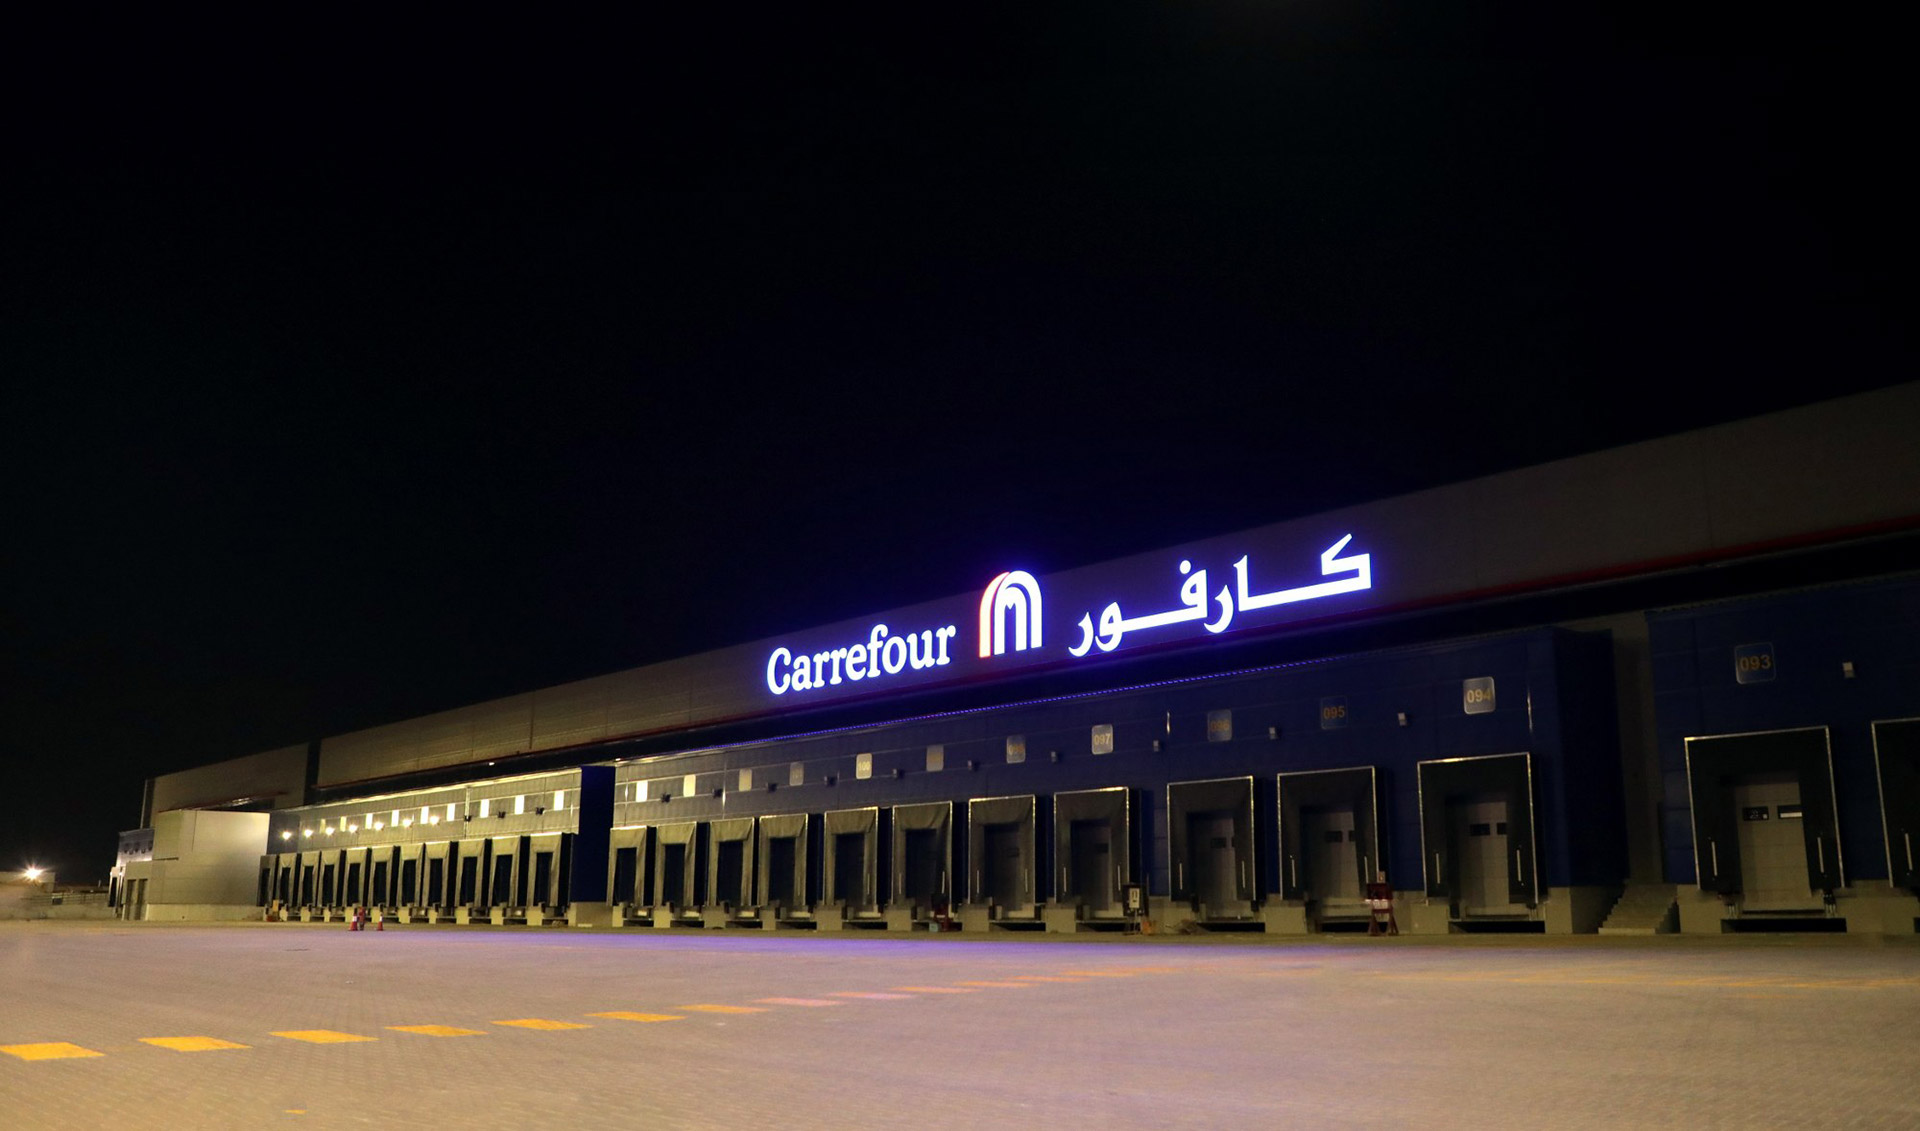 Carrefour Signage in Oman